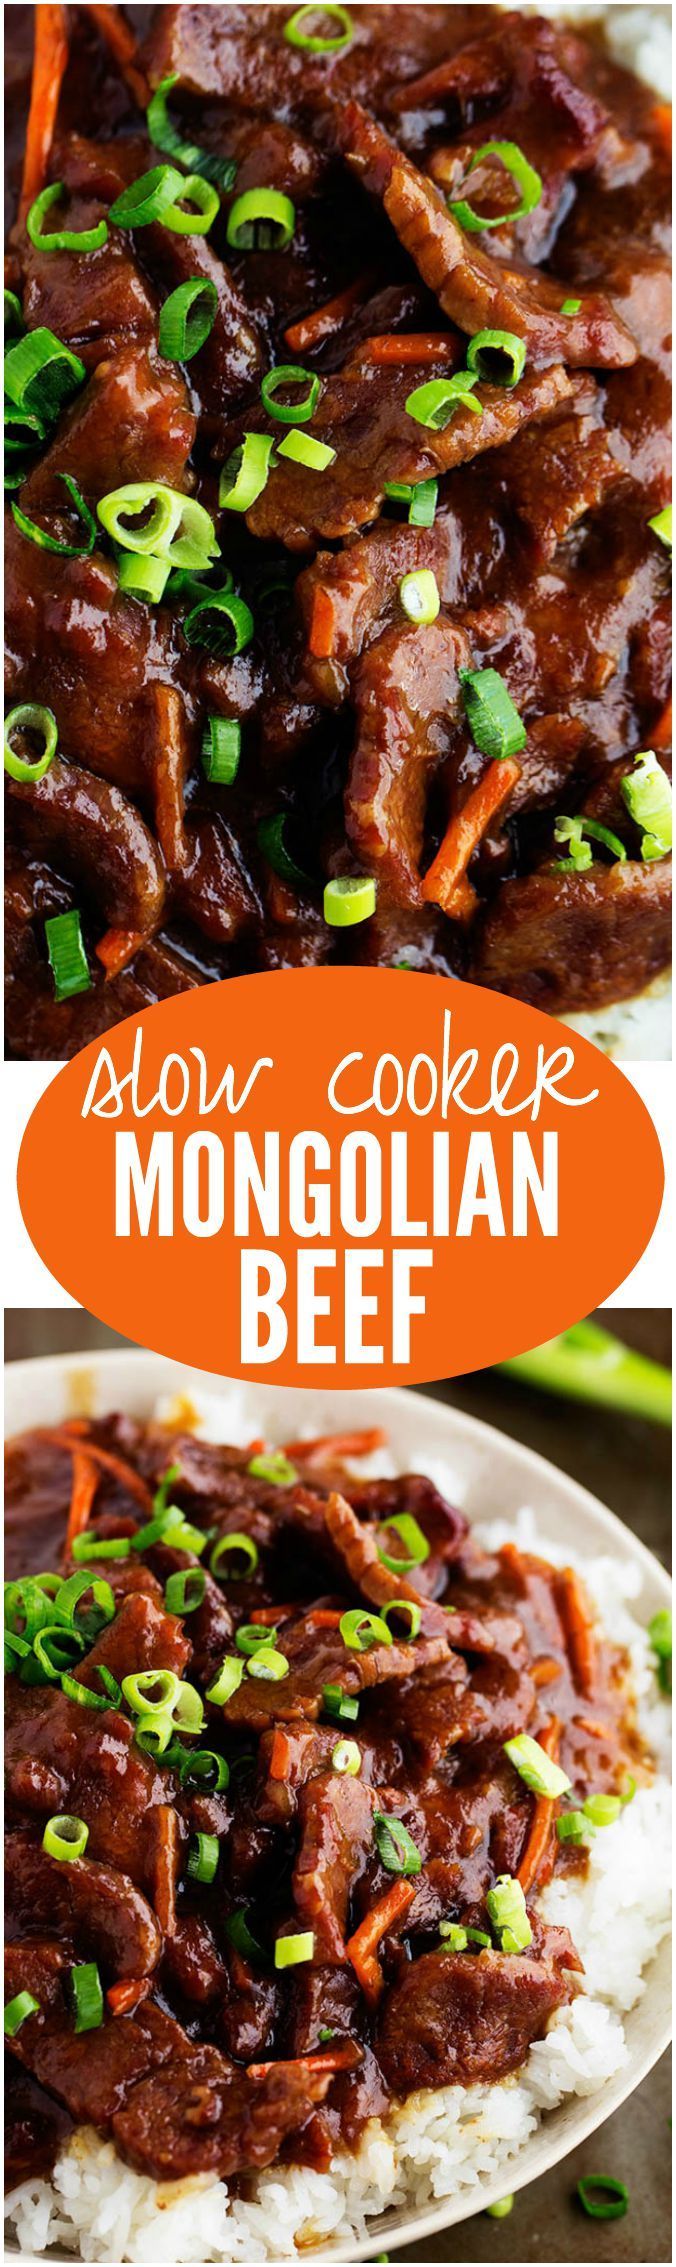 This Slow Cooker Mongolian Beef is melt in your mouth tender and has AMAZING flavor! One of the best and e